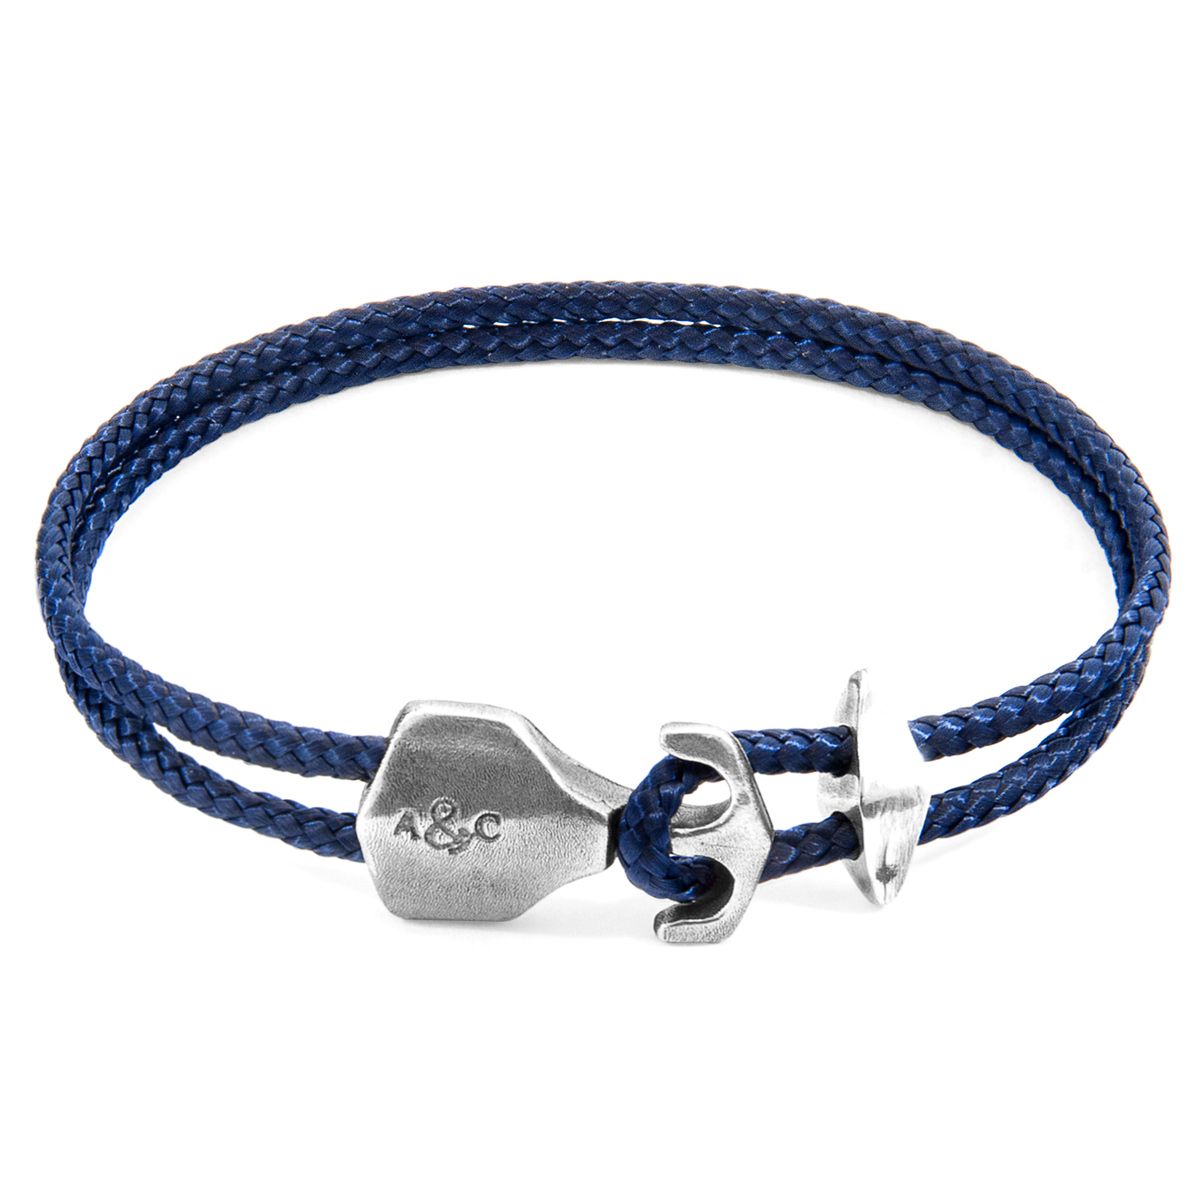 The Navy Blue Delta Anchor Silver and Rope Bracelet was both designed and skilfully handcrafted completely in Great Britain, In Quality We Trust. For the Modern Journeyman (and woman), ANCHOR & CREW takes ownership of an exploratory lifestyle and enjoys the Happy-Good Life. Combining British craft manufacturing with a discerning modern-minimalist style, this ANCHOR & CREW bracelet features:

3mm diameter performance Marine Grade polyester and nylon rope (GB) 
Secure solid .925 sterling silver anchor and rhombus clamp (GB) 

SIZING
This bracelet is available in four bracelet lengths, 17cm, 19cm, 21cm or 23cm in circumference. To take the bracelet on or off your wrist, simply (un)hook the clasp from the loop and slide the rhombus clamp for added security.